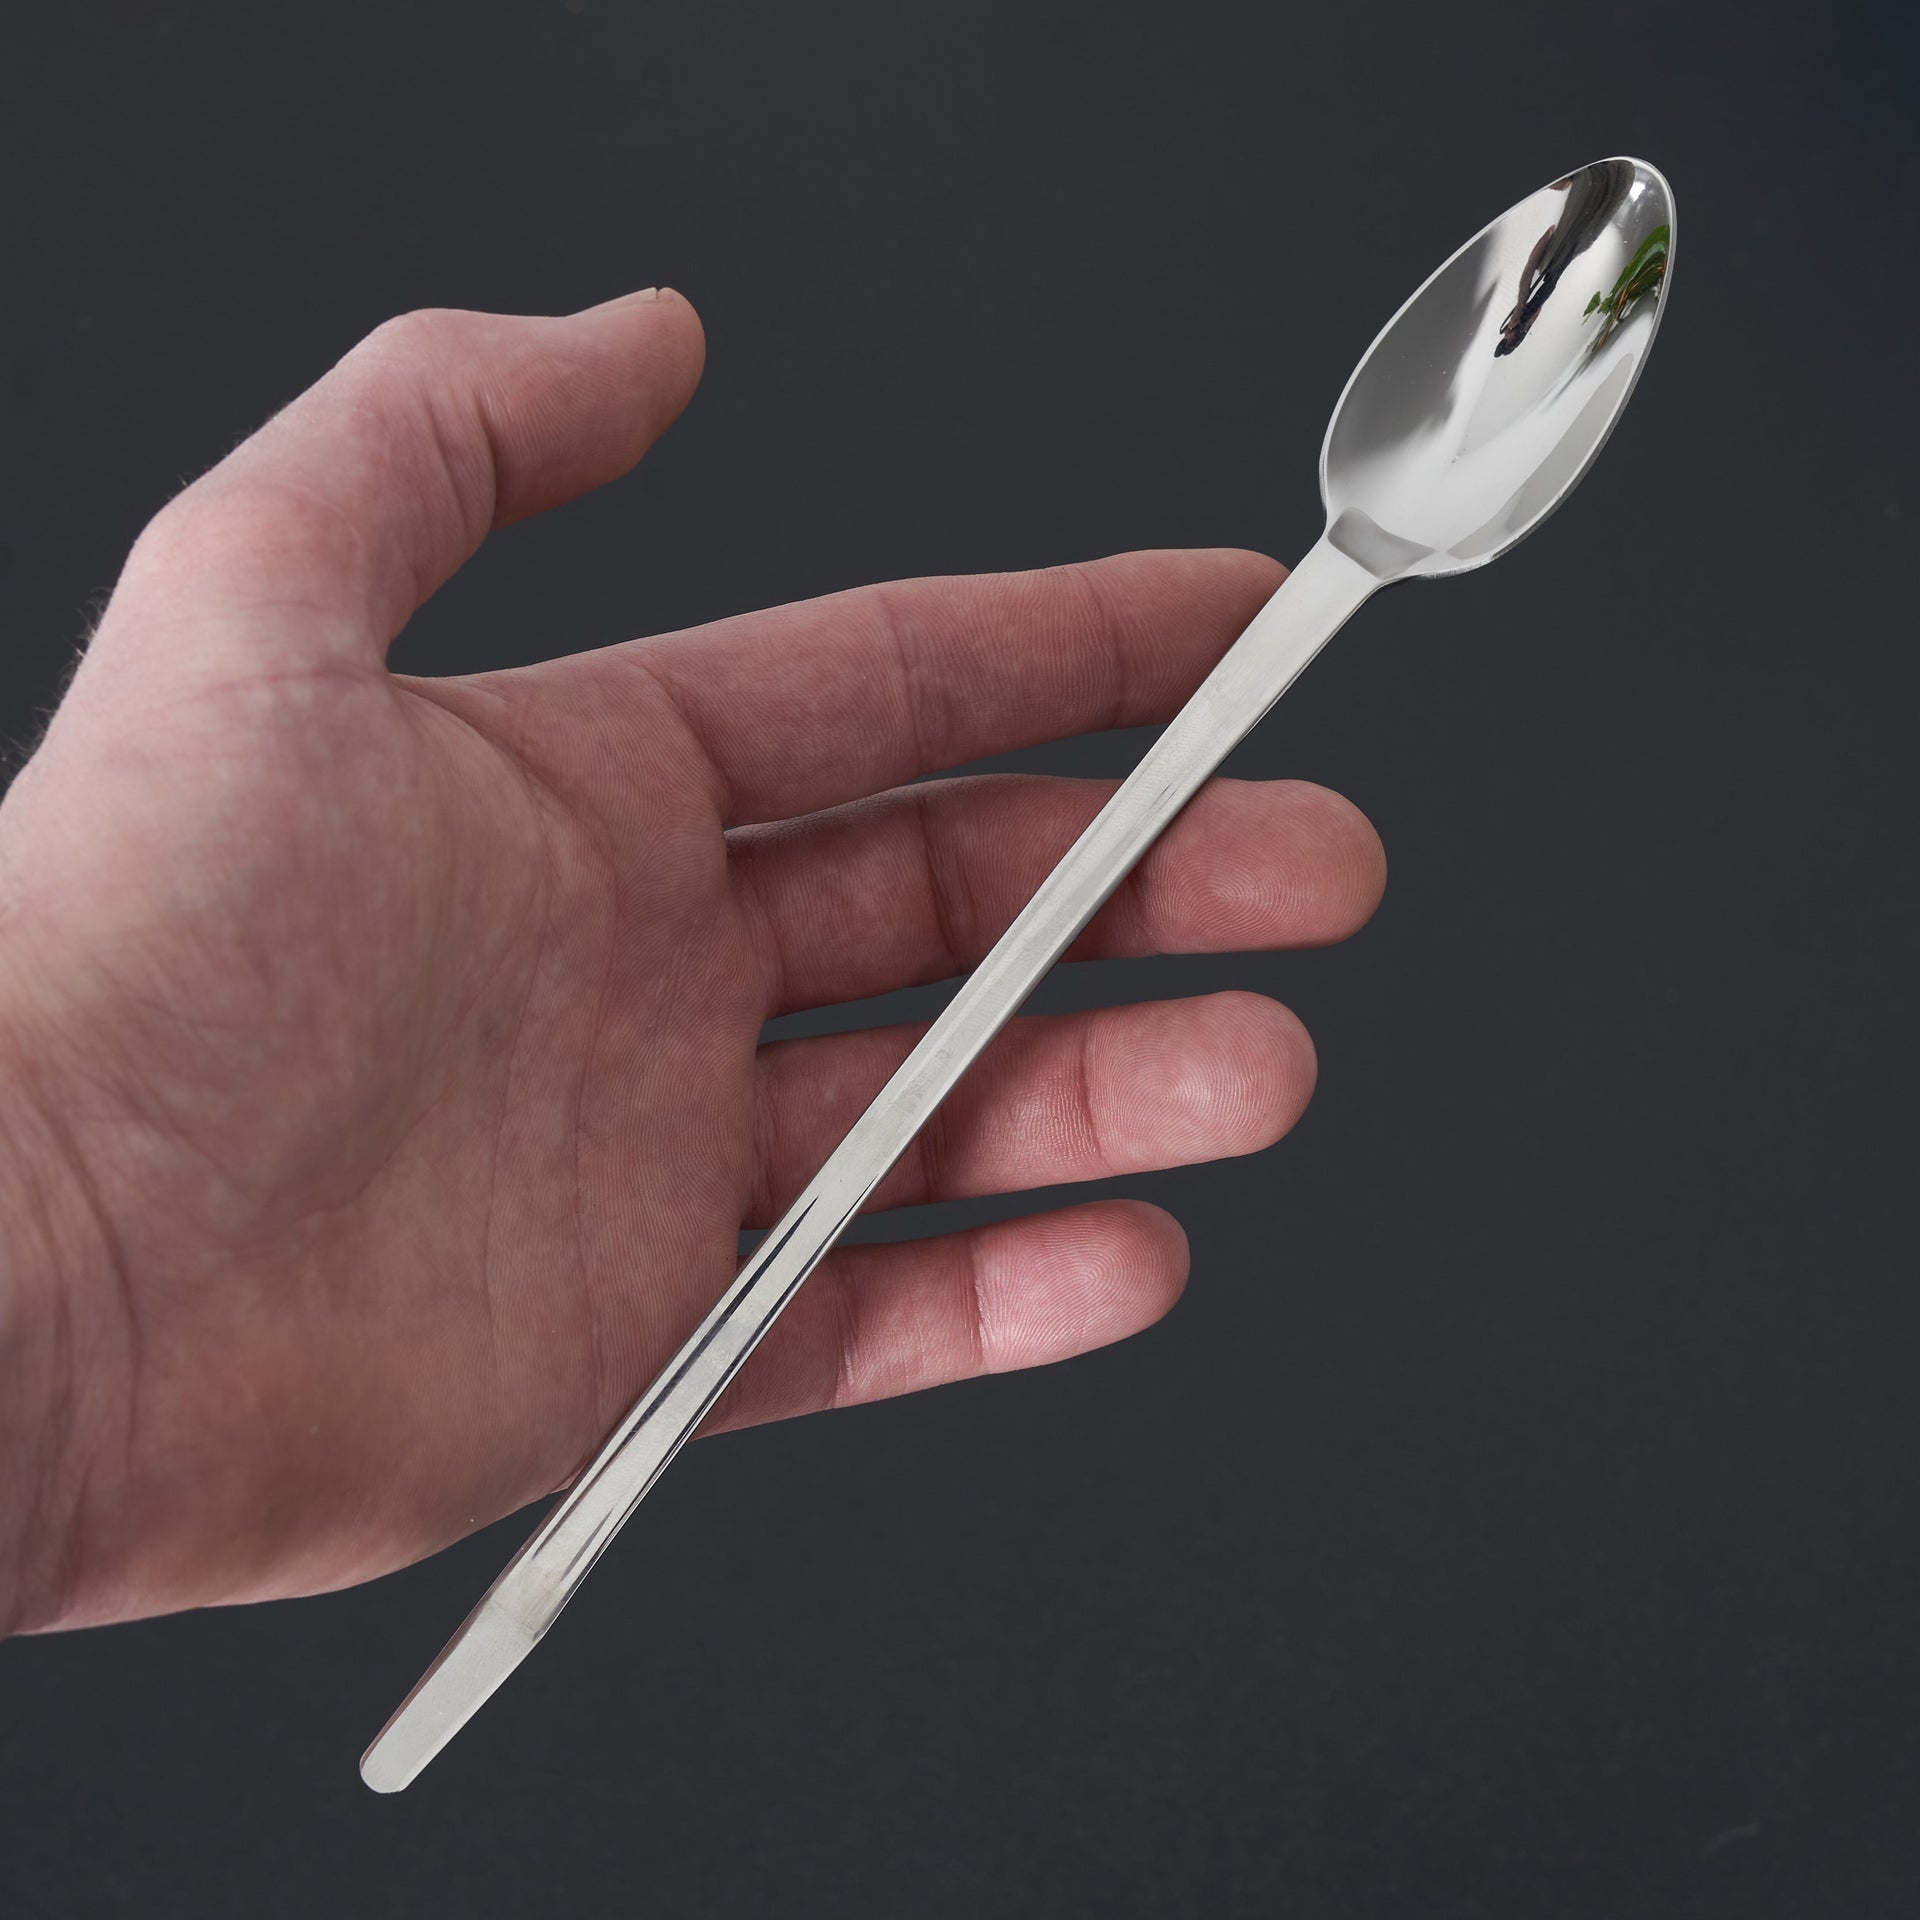 https://carbonknifeco.com/cdn/shop/files/Modernist-Cutlery-Quenelle-Spoon-Spoons-Modernist-Cutlery-chef-culinary-japanese-knife-knives-4.jpg?v=1704153523&width=1920